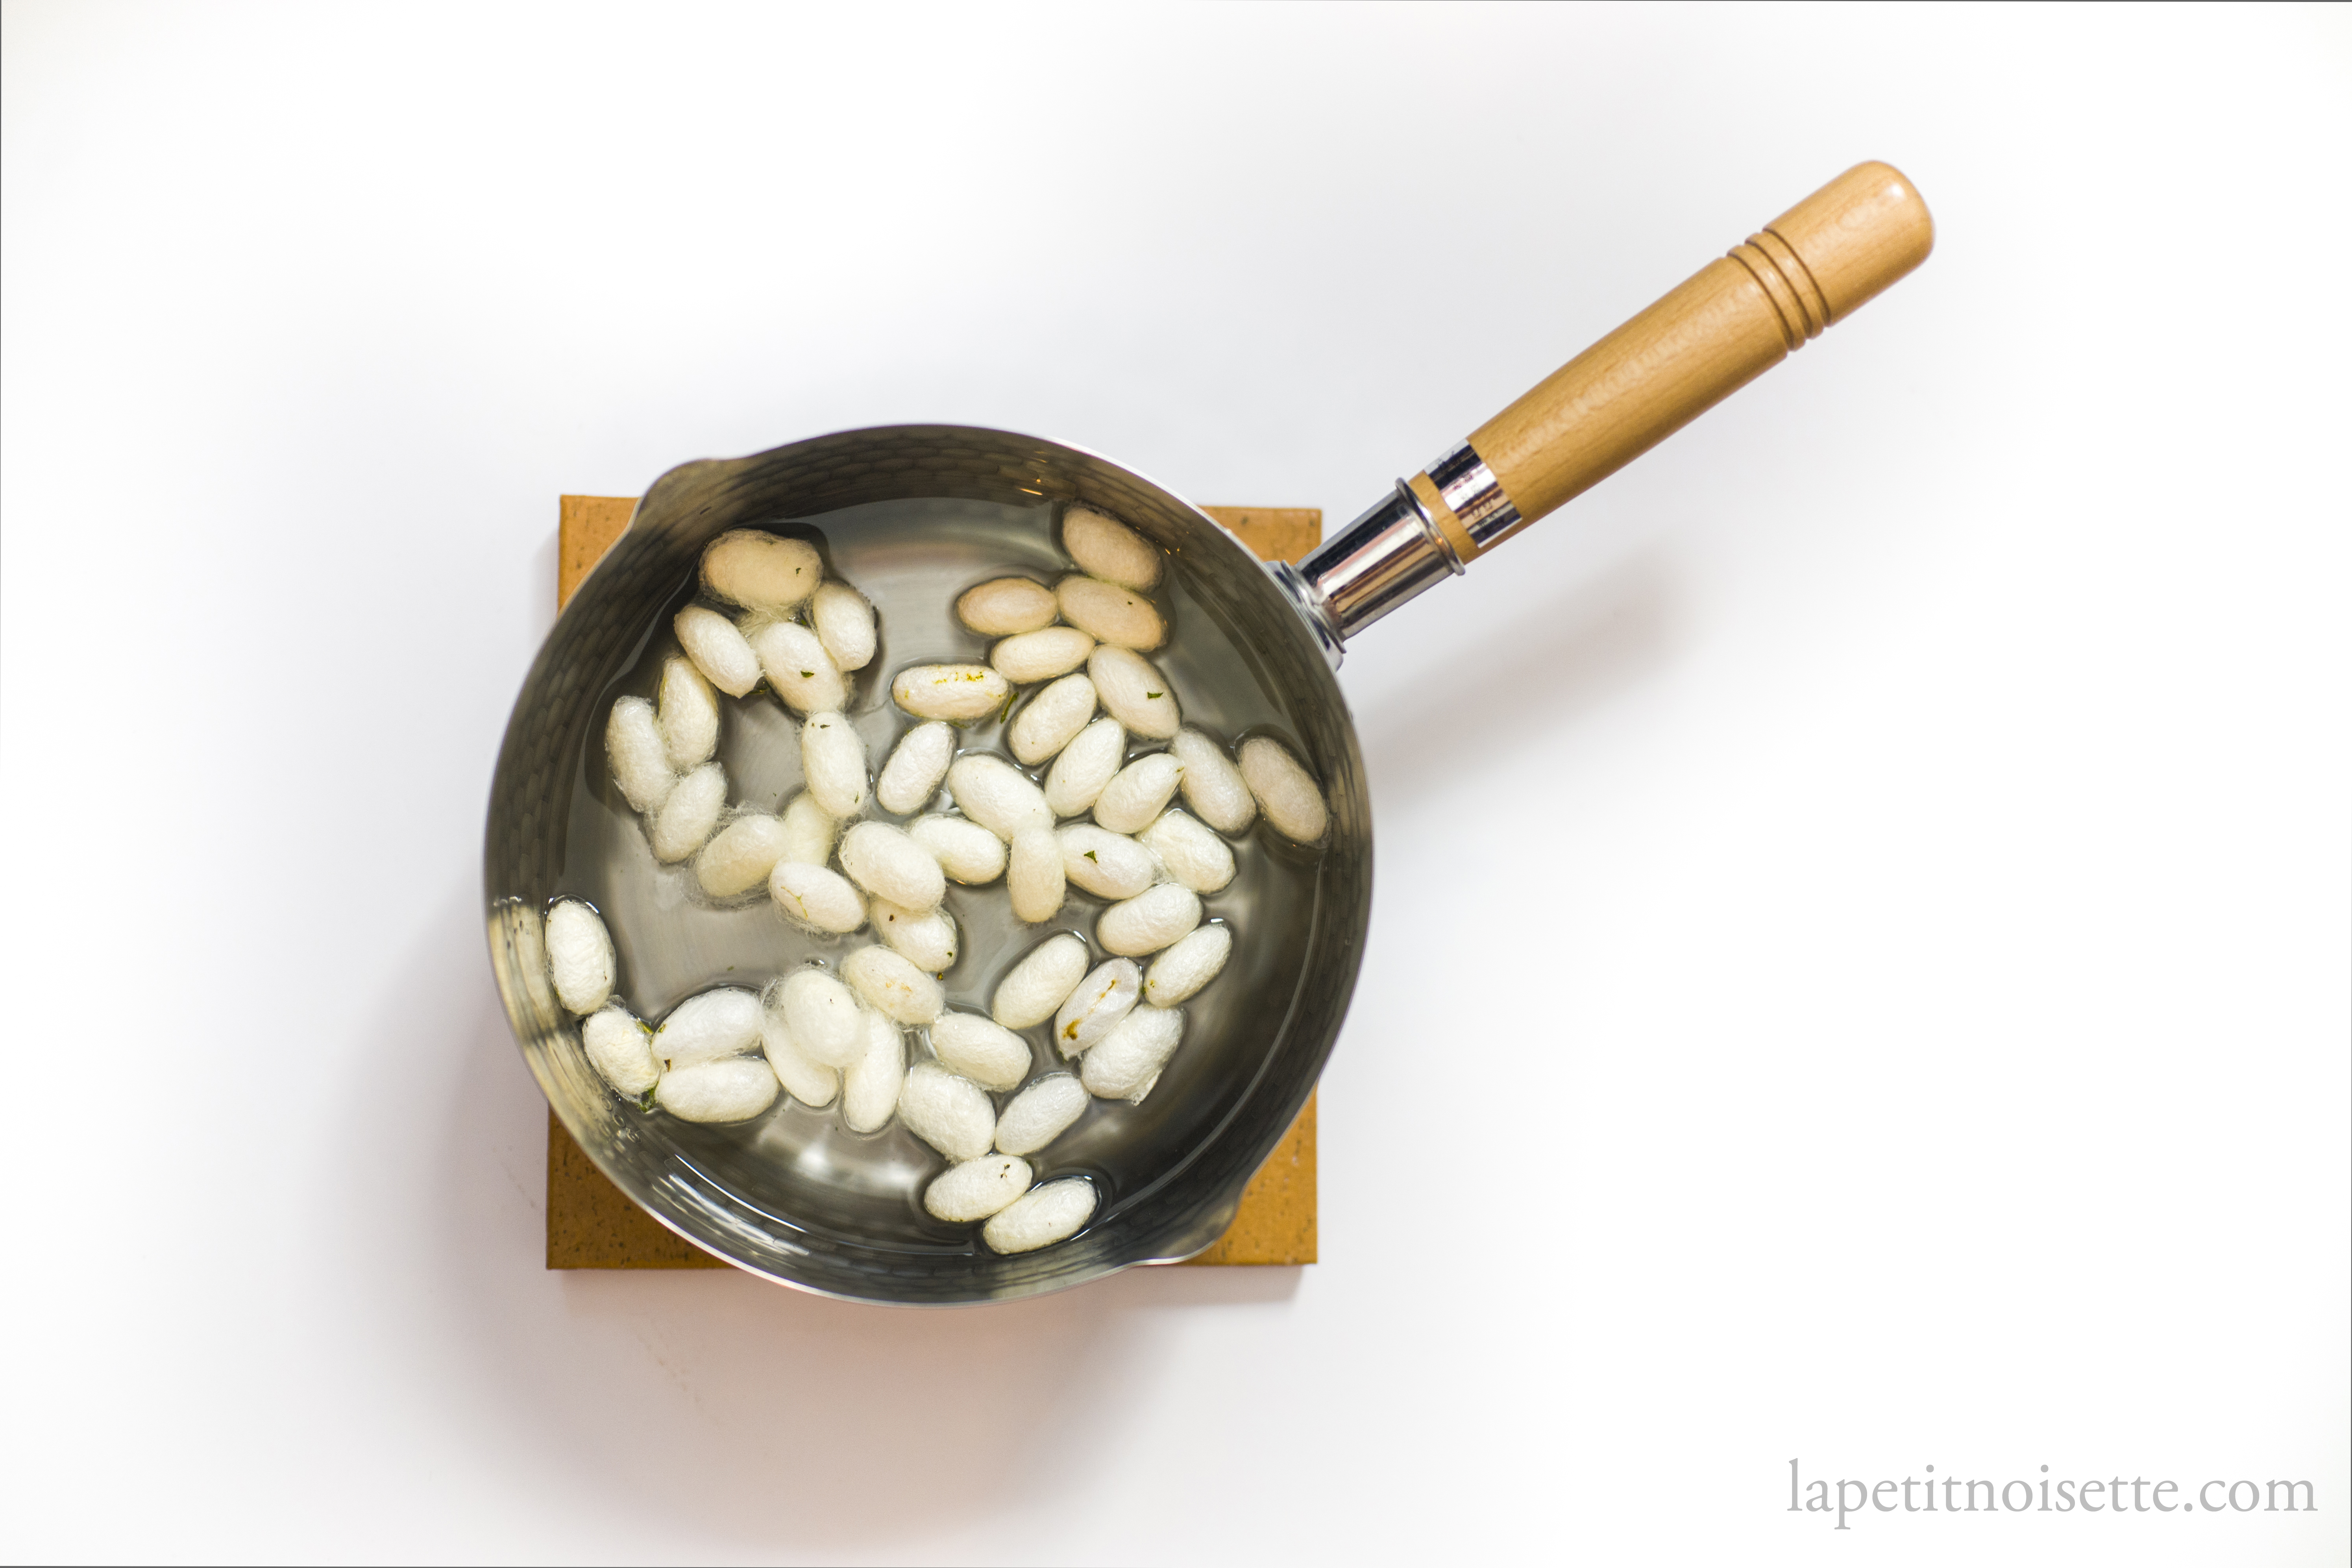 Boiling silkworm cocoons in water to kill the pupae.